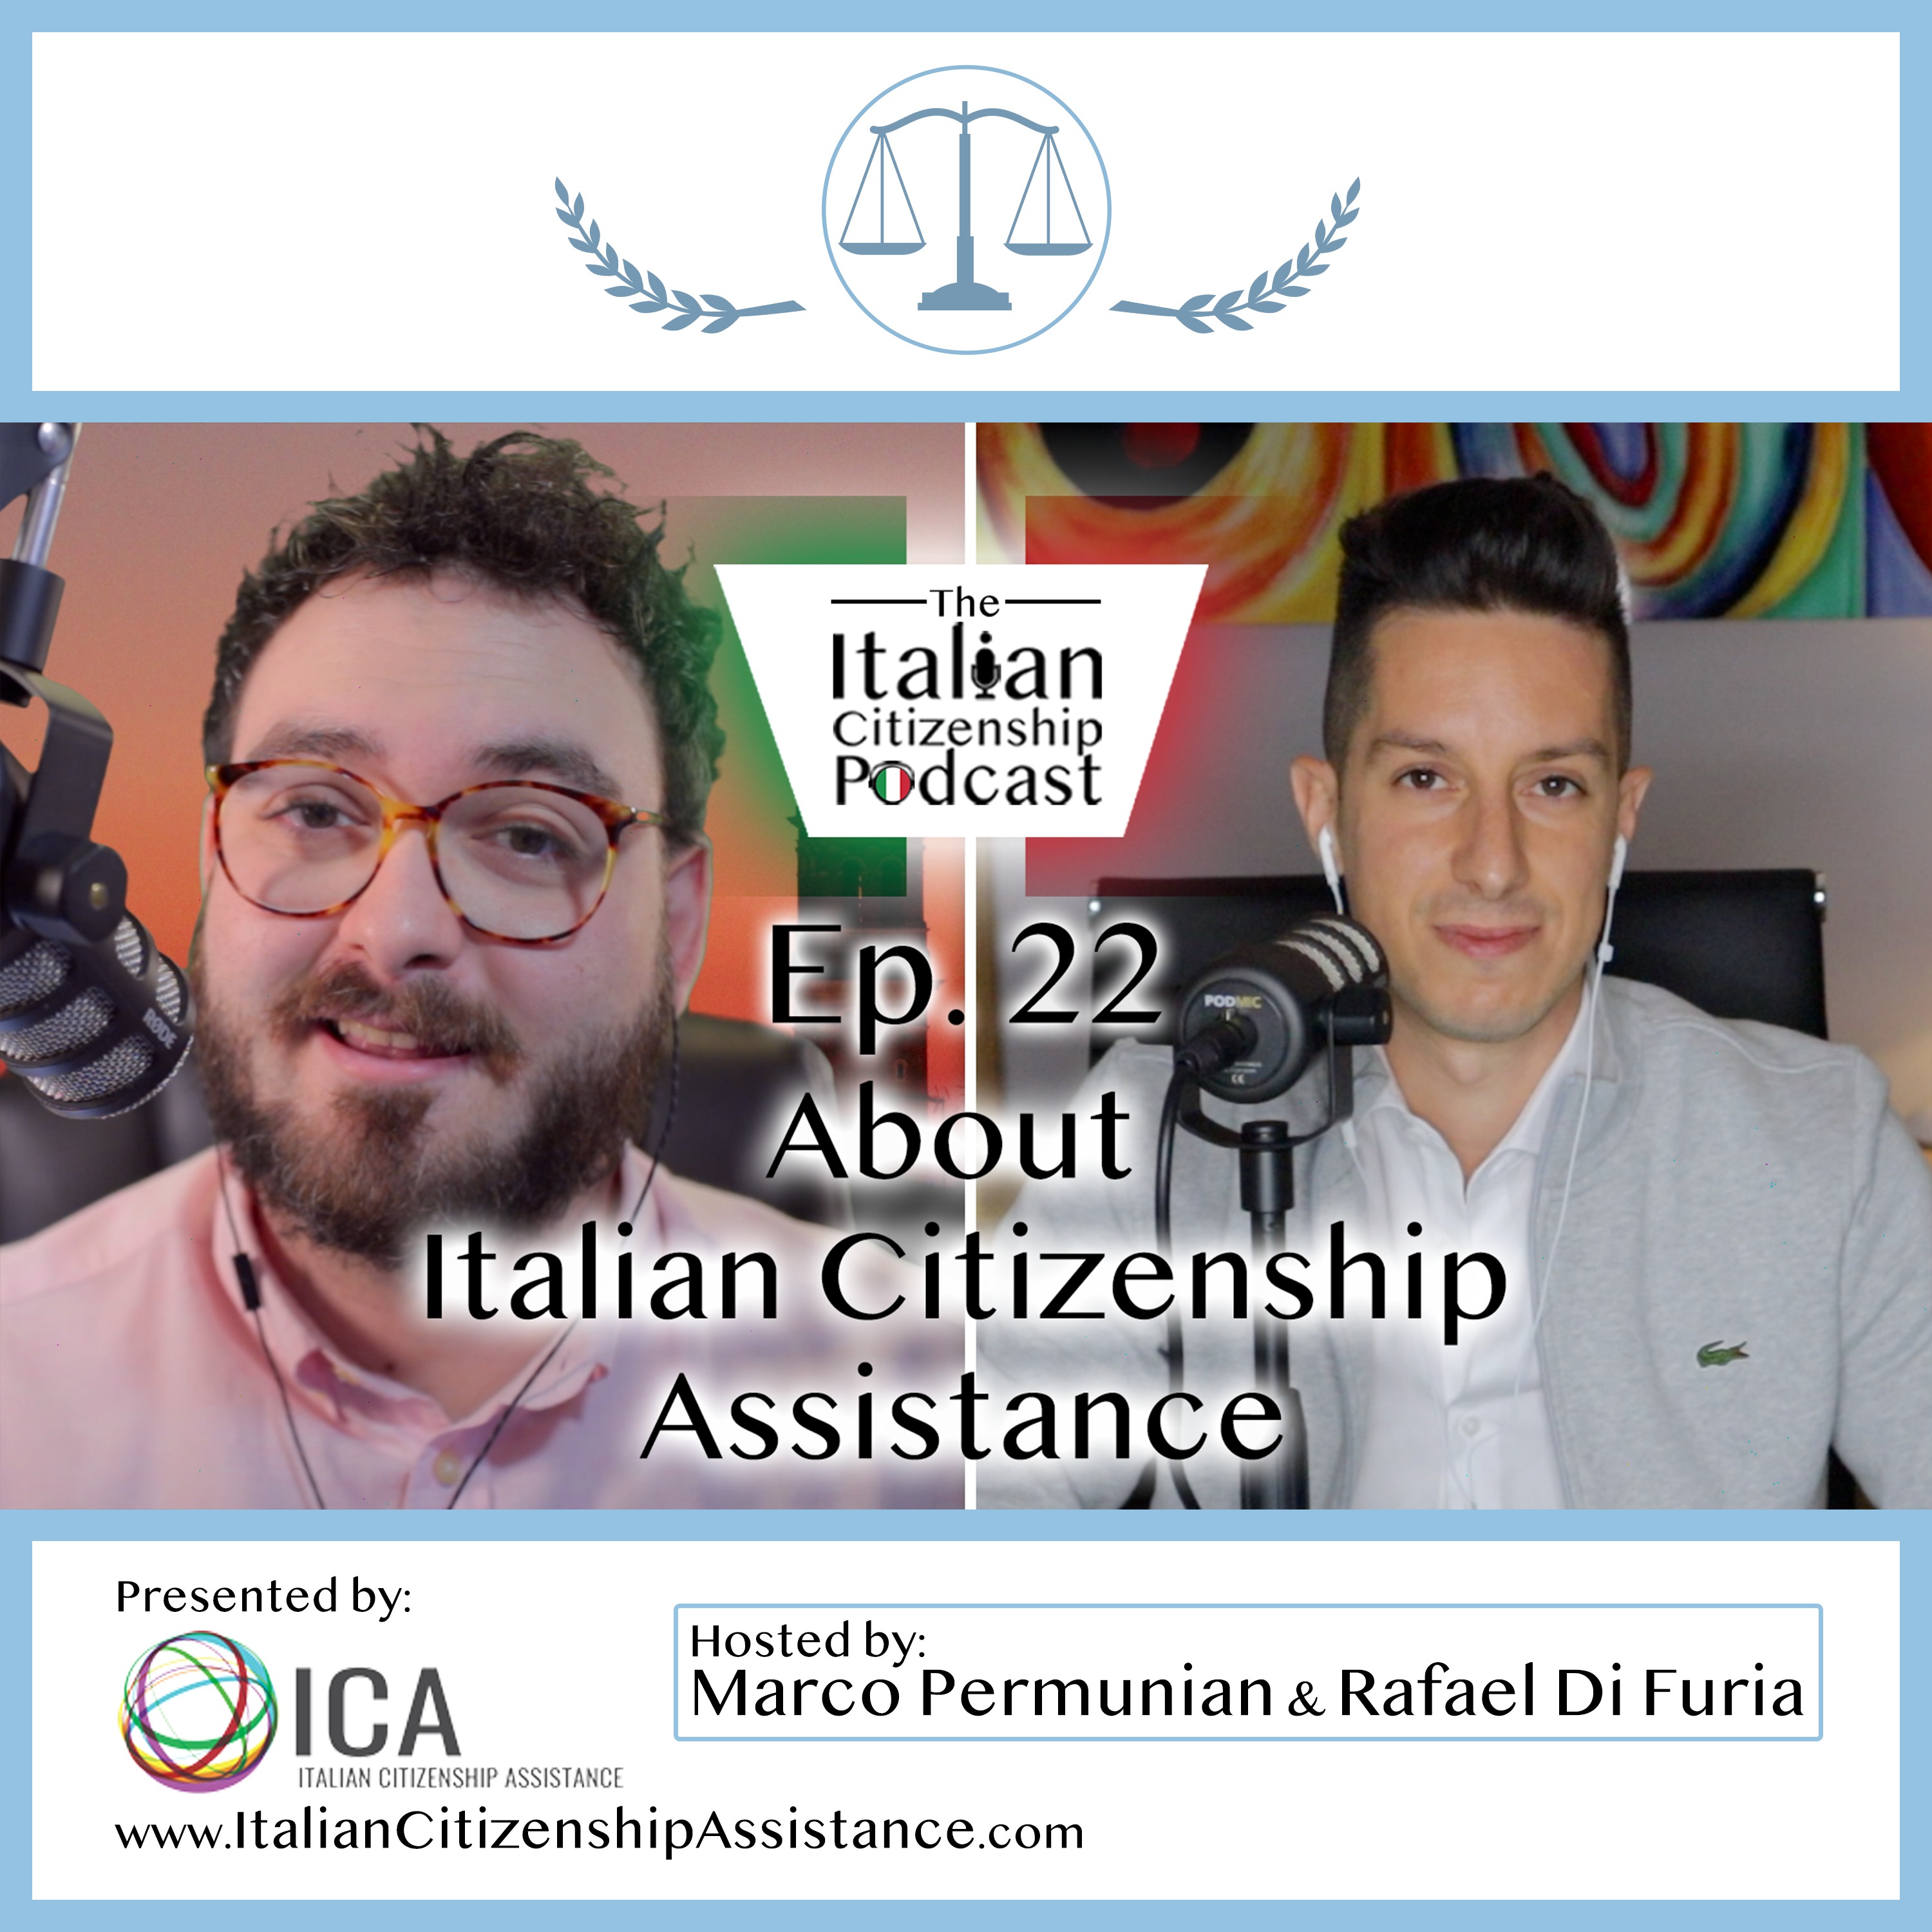 Italian Citizenship Assistance - Who are they?